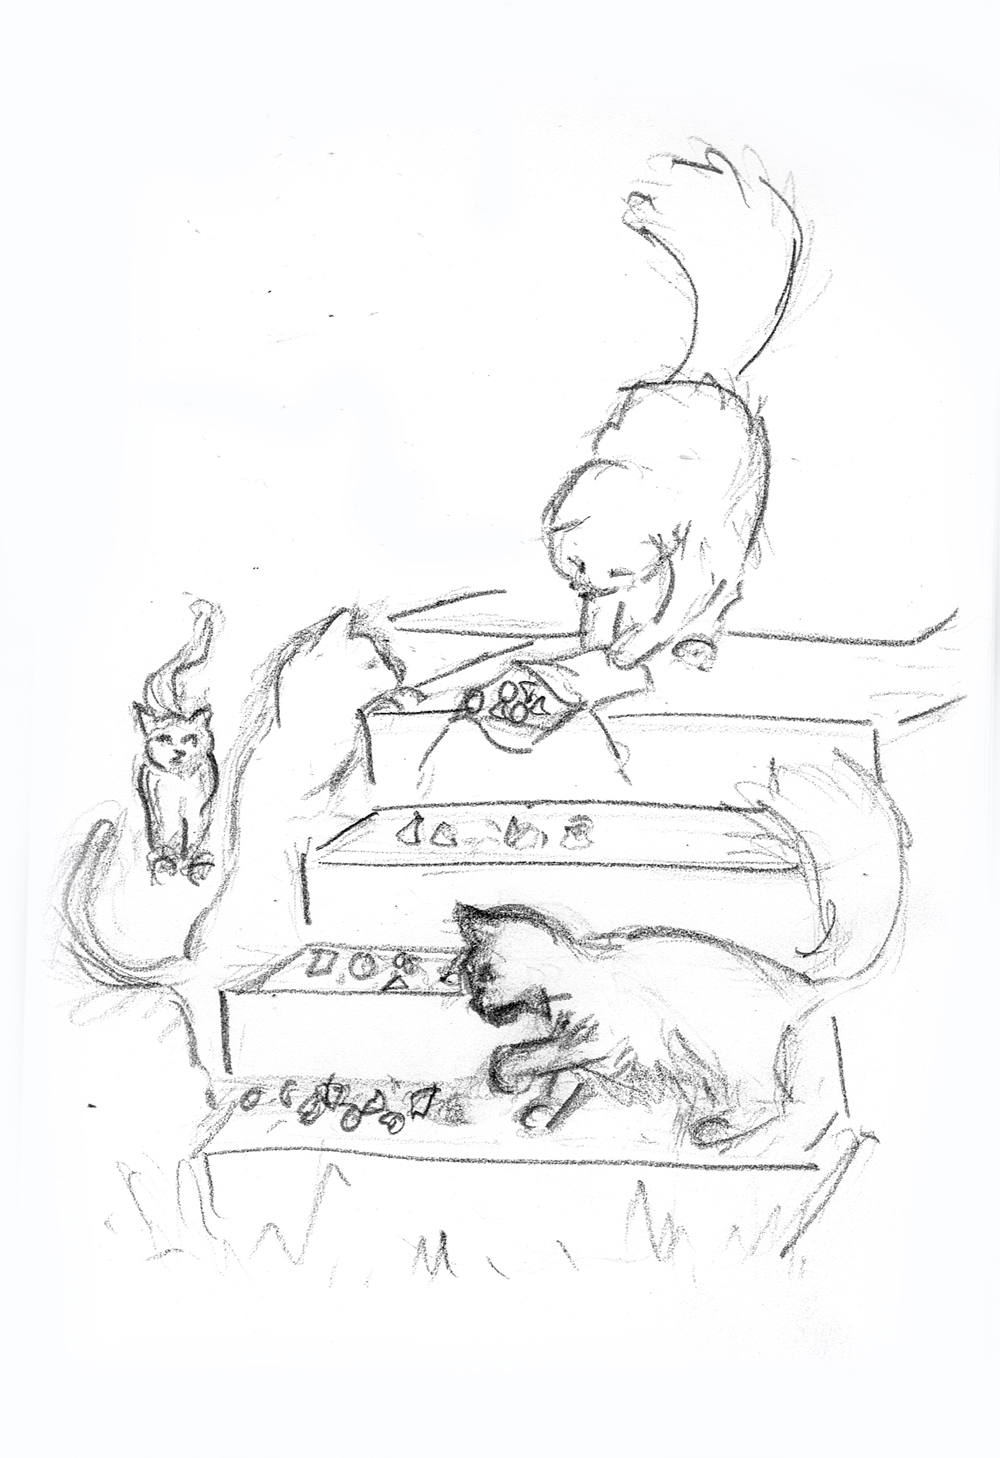 pencil sketch of cats on steps for illustration